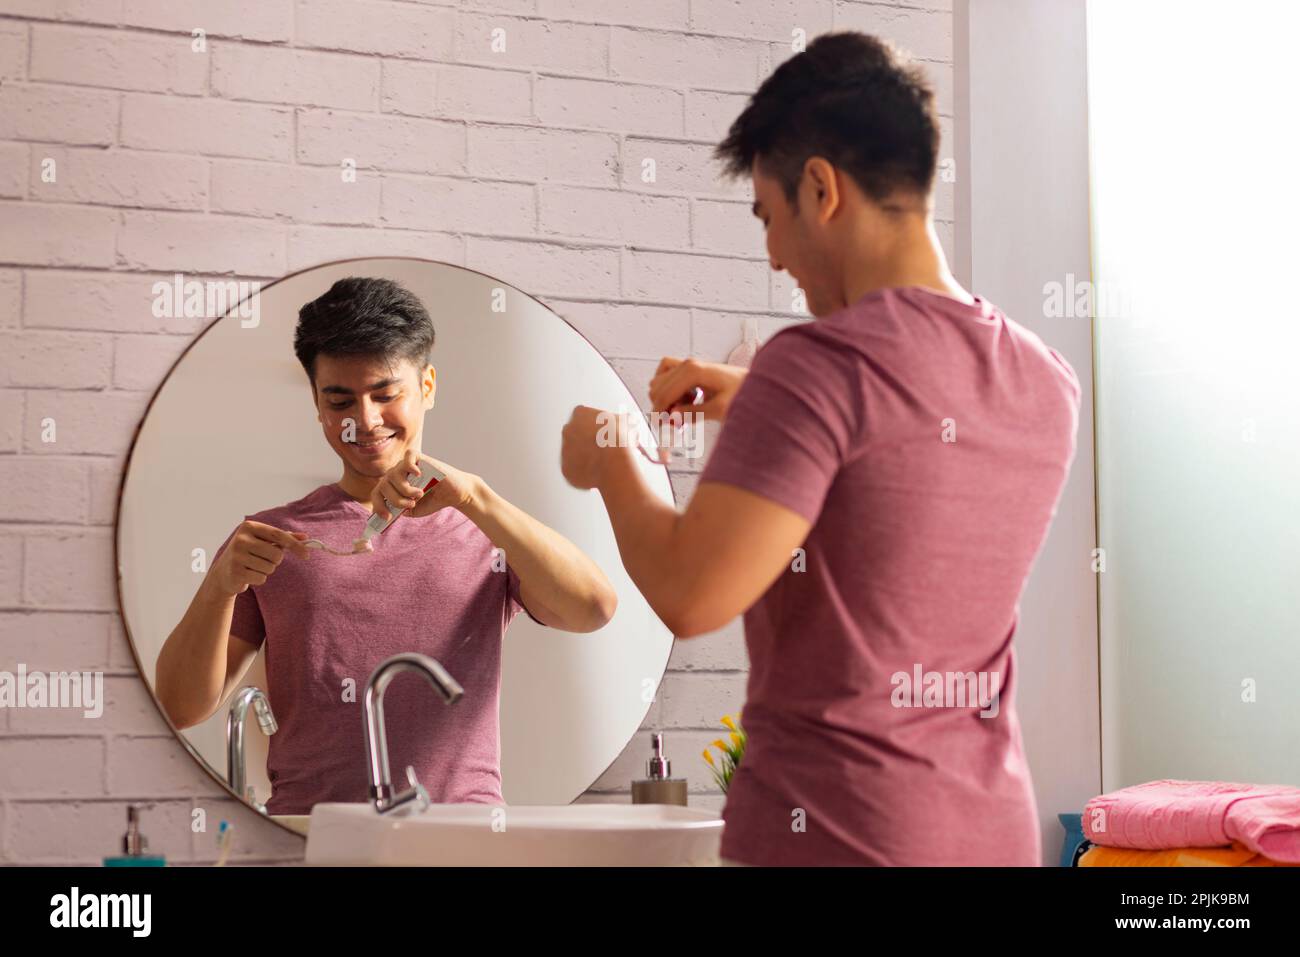 Young man squeezing out toothpaste on a toothbrush Stock Photo